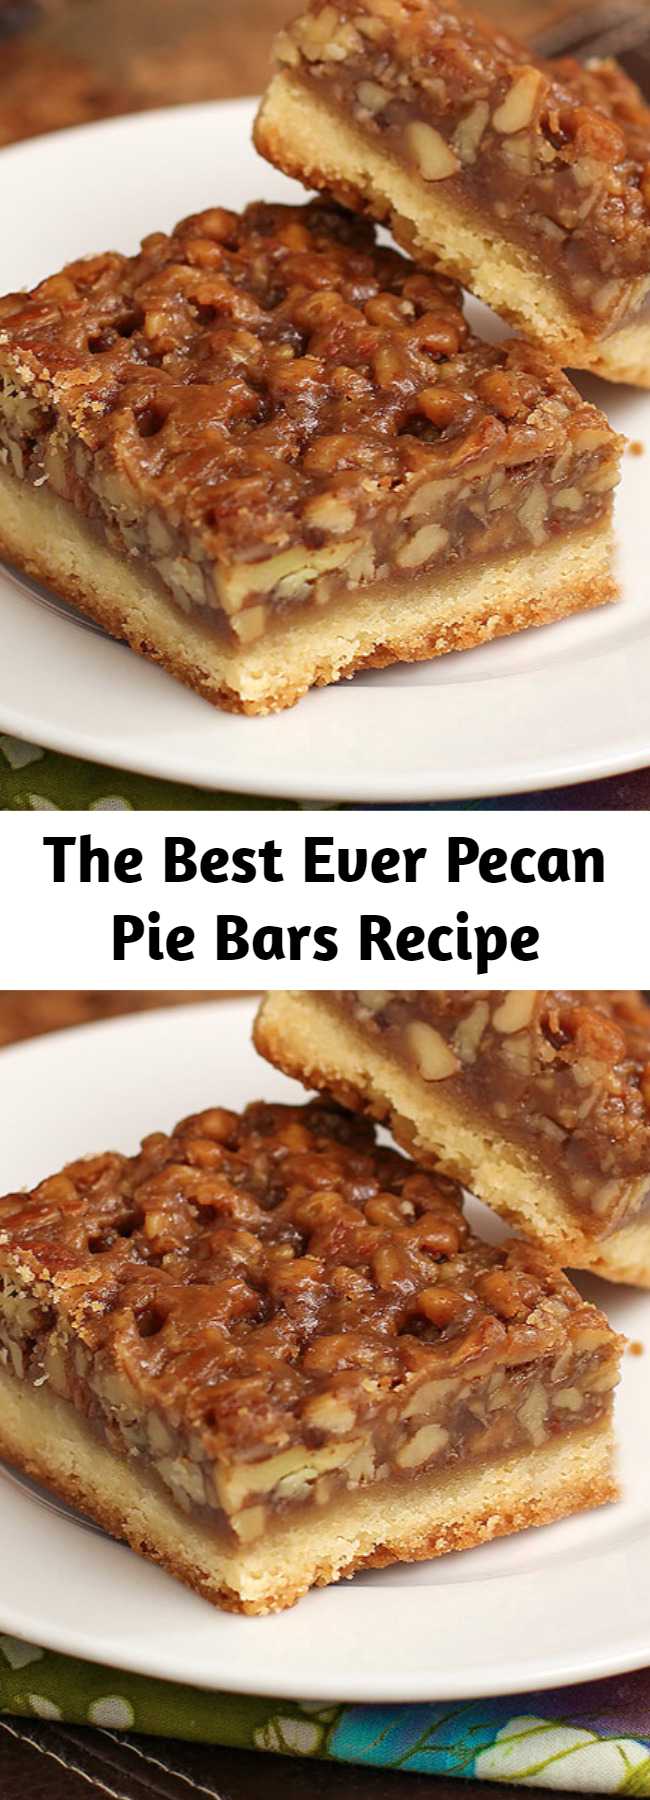 The Best Ever Pecan Pie Bars Recipe - The Best Ever Pecan Pie Bars are so good people offer to pay me for them. A fabulous recipe with a caramelized pecan pie set atop a shortbread crust is the absolute perfect nut bar. My family requests more of this dessert than any other every year. #desserts #pecanpie